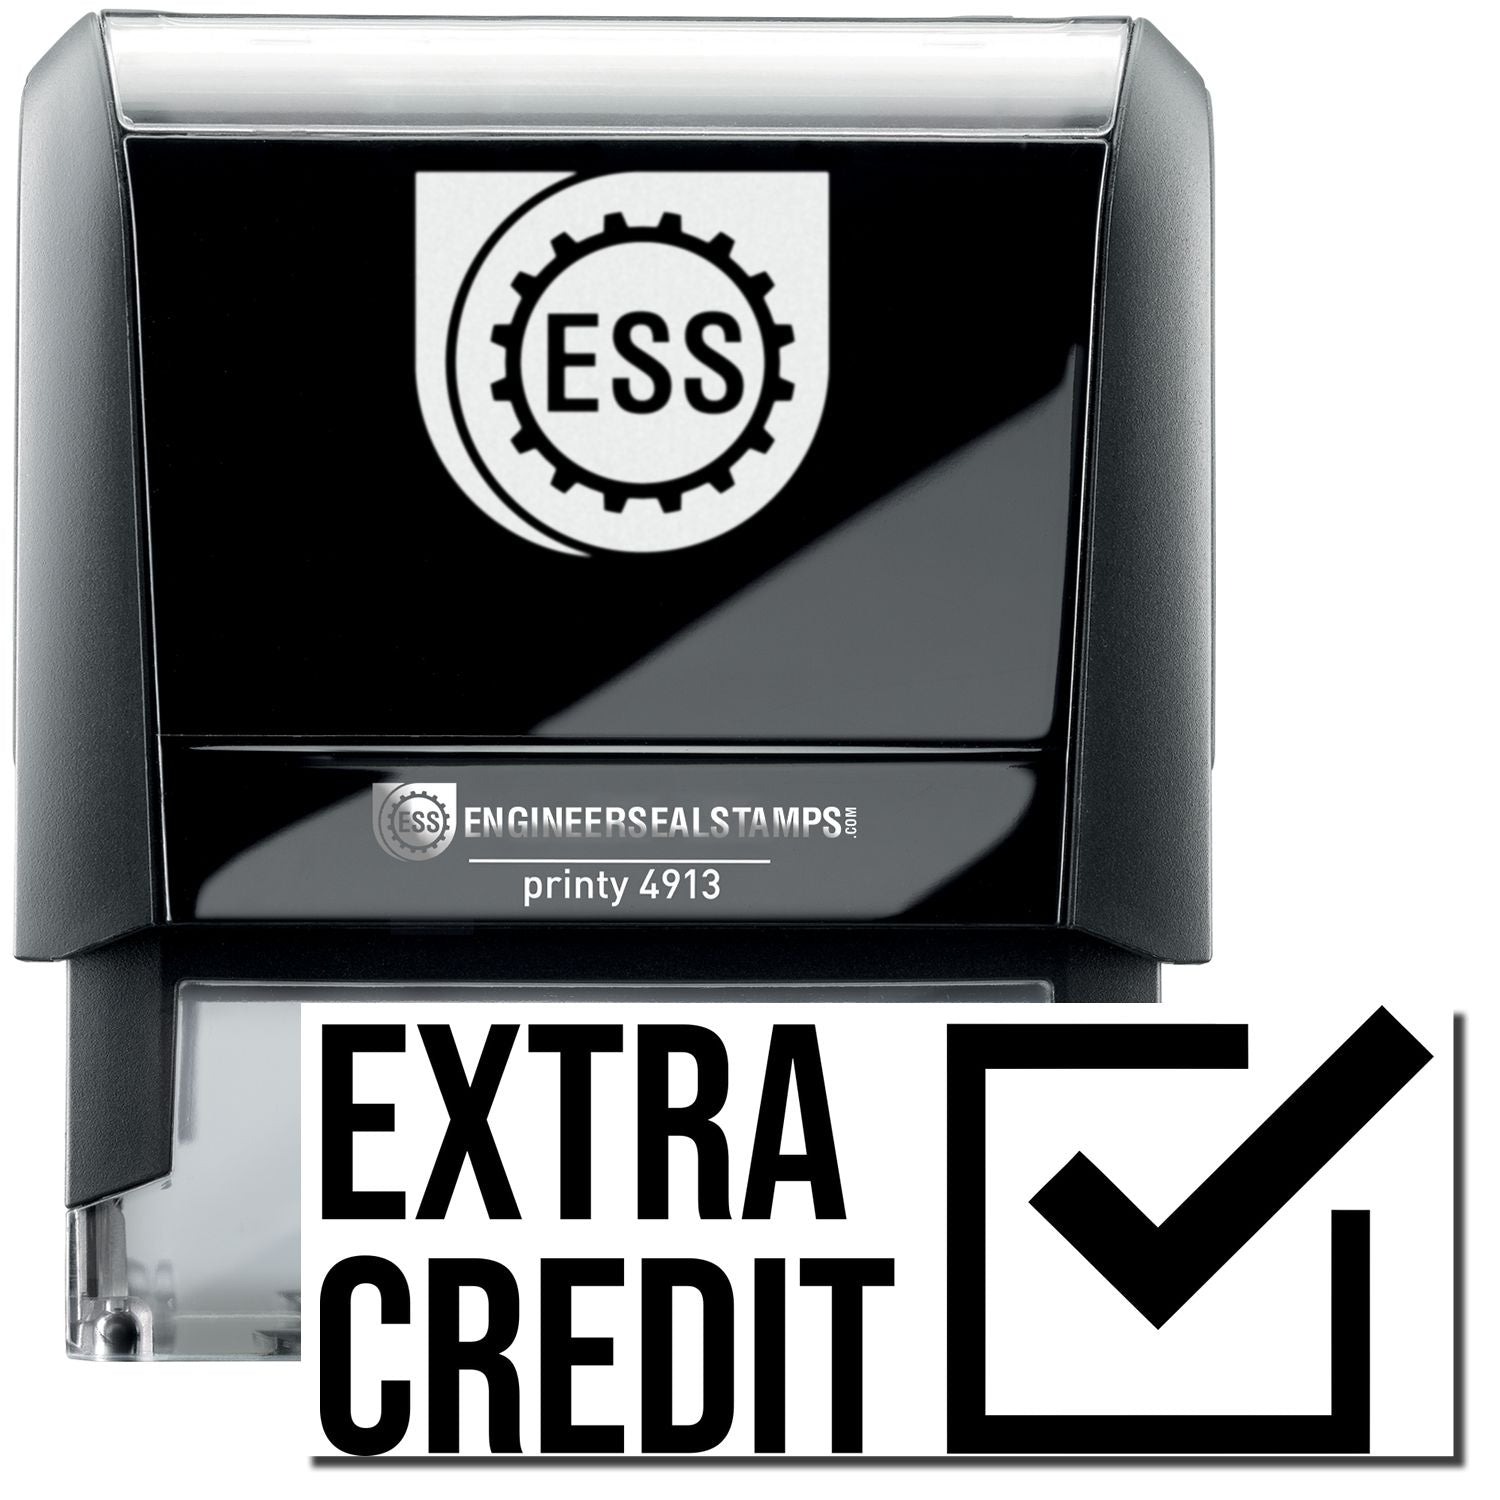 A self-inking stamp with a stamped image showing how the text "EXTRA CREDIT" (each word in vertical order) in a large font with a checked box on the right side is displayed after stamping.